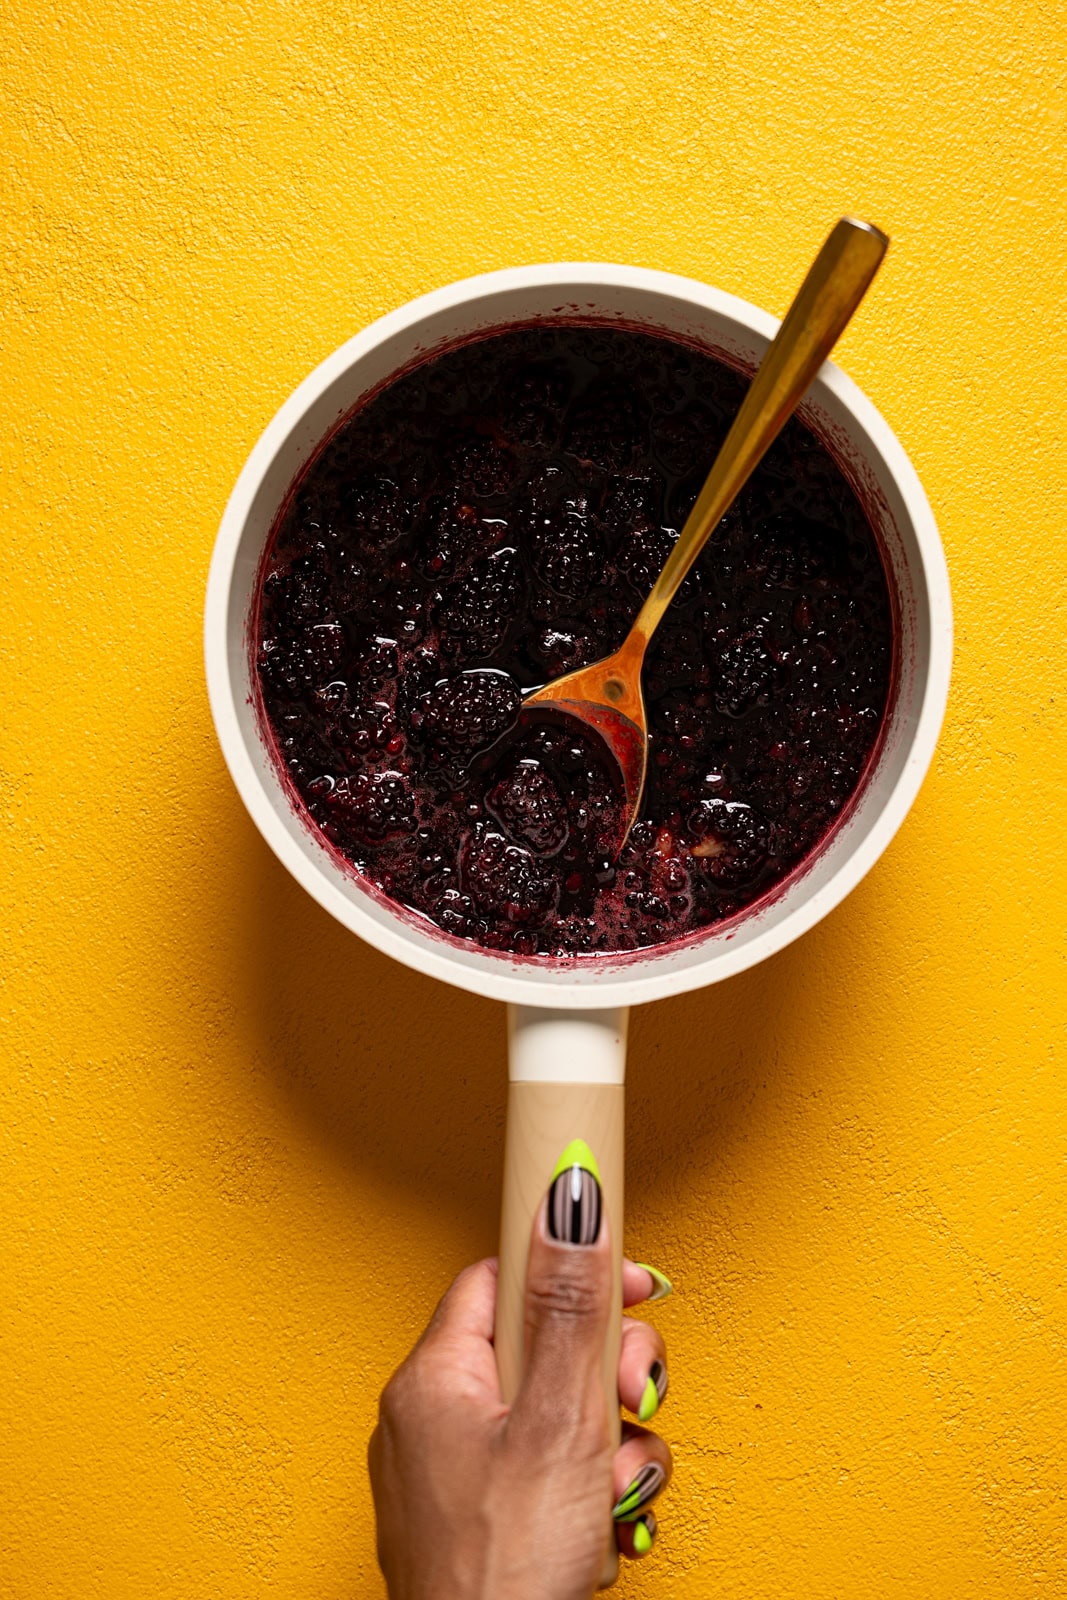 Blackberry sauce in a pot being held with a spoon.